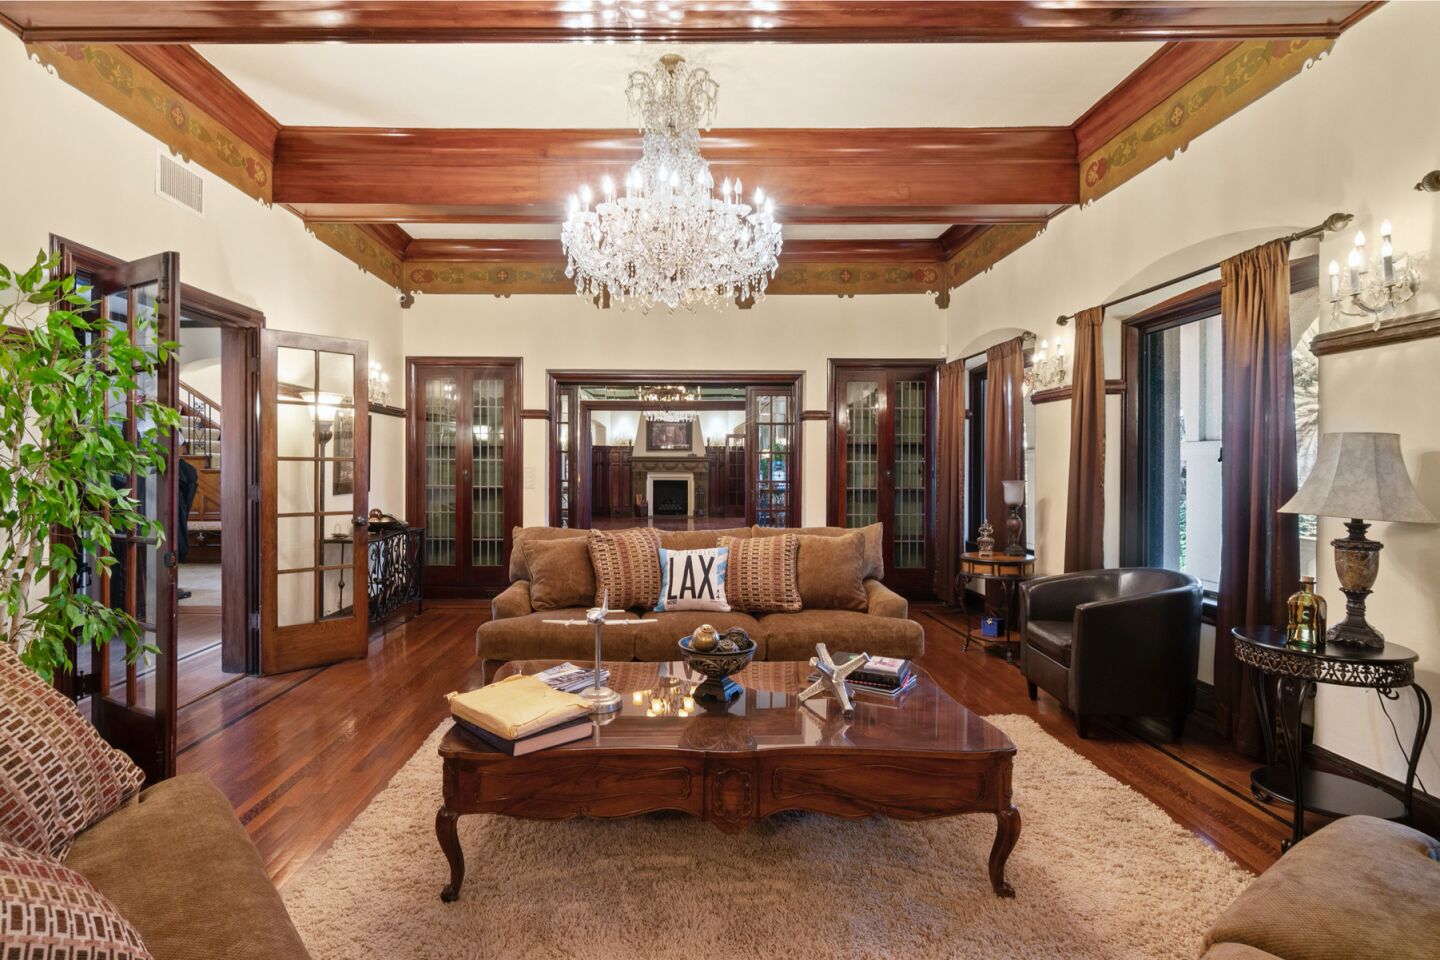 The formal living room.